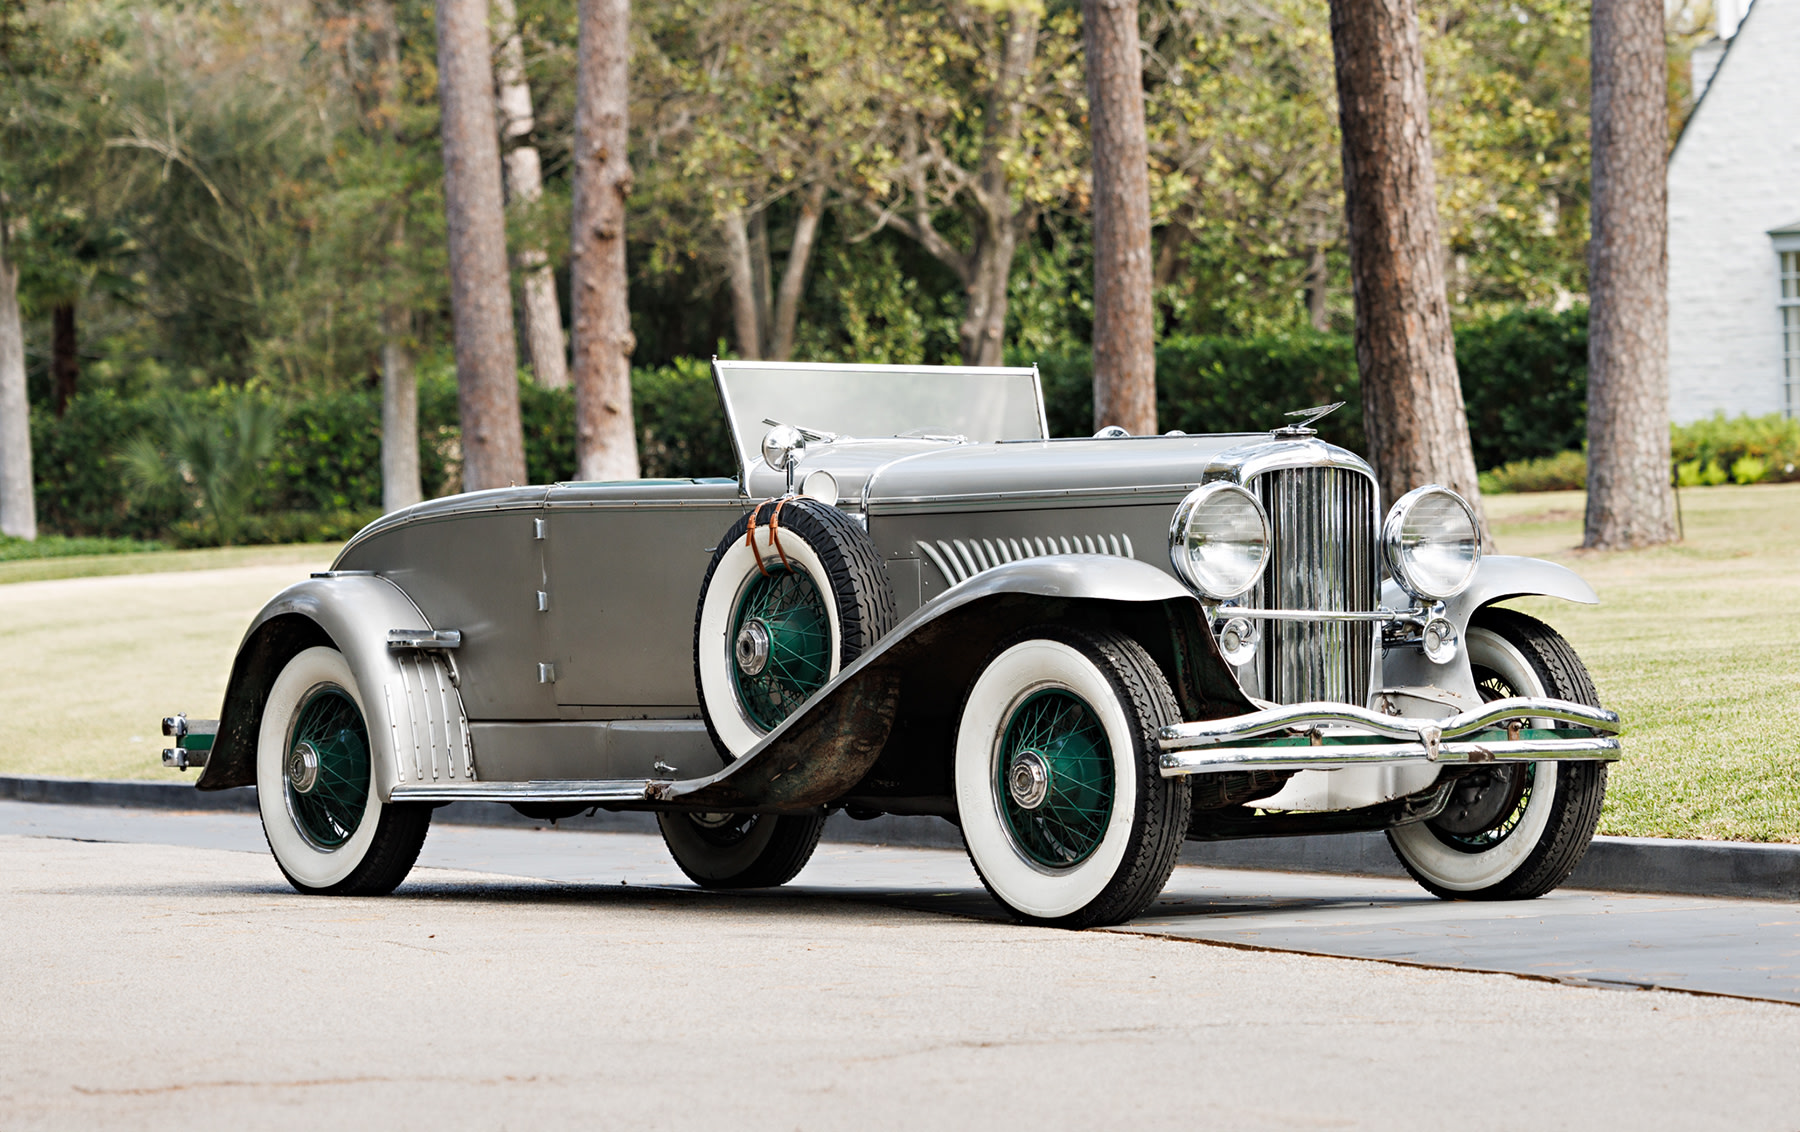 1931 Duesenberg Model J Disappearing-Top Convertible Coupe (FL24)